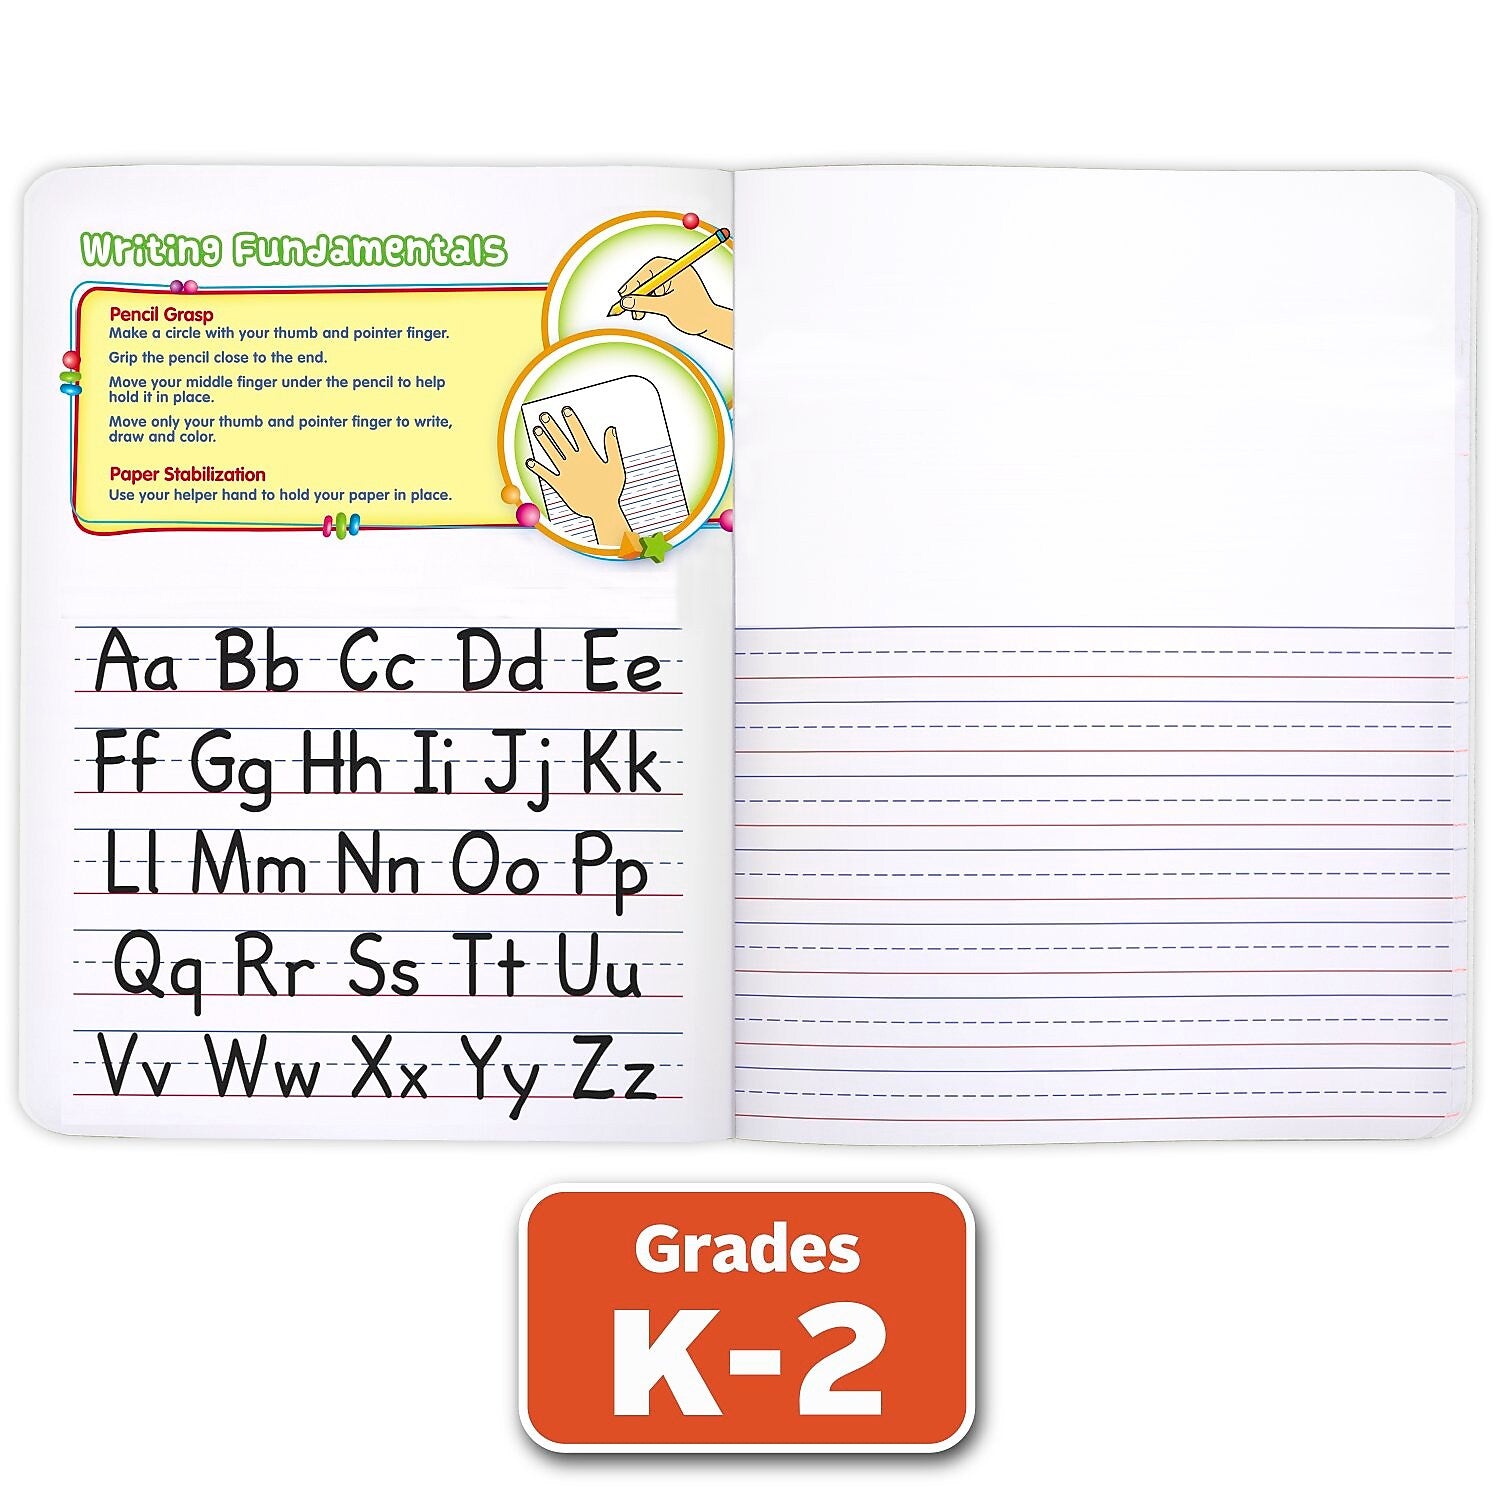 Mead Grades K-2 Primary Journal Composition Notebooks, 7.5" x 9.75", Wide Ruled, 100 Sheets, Blue